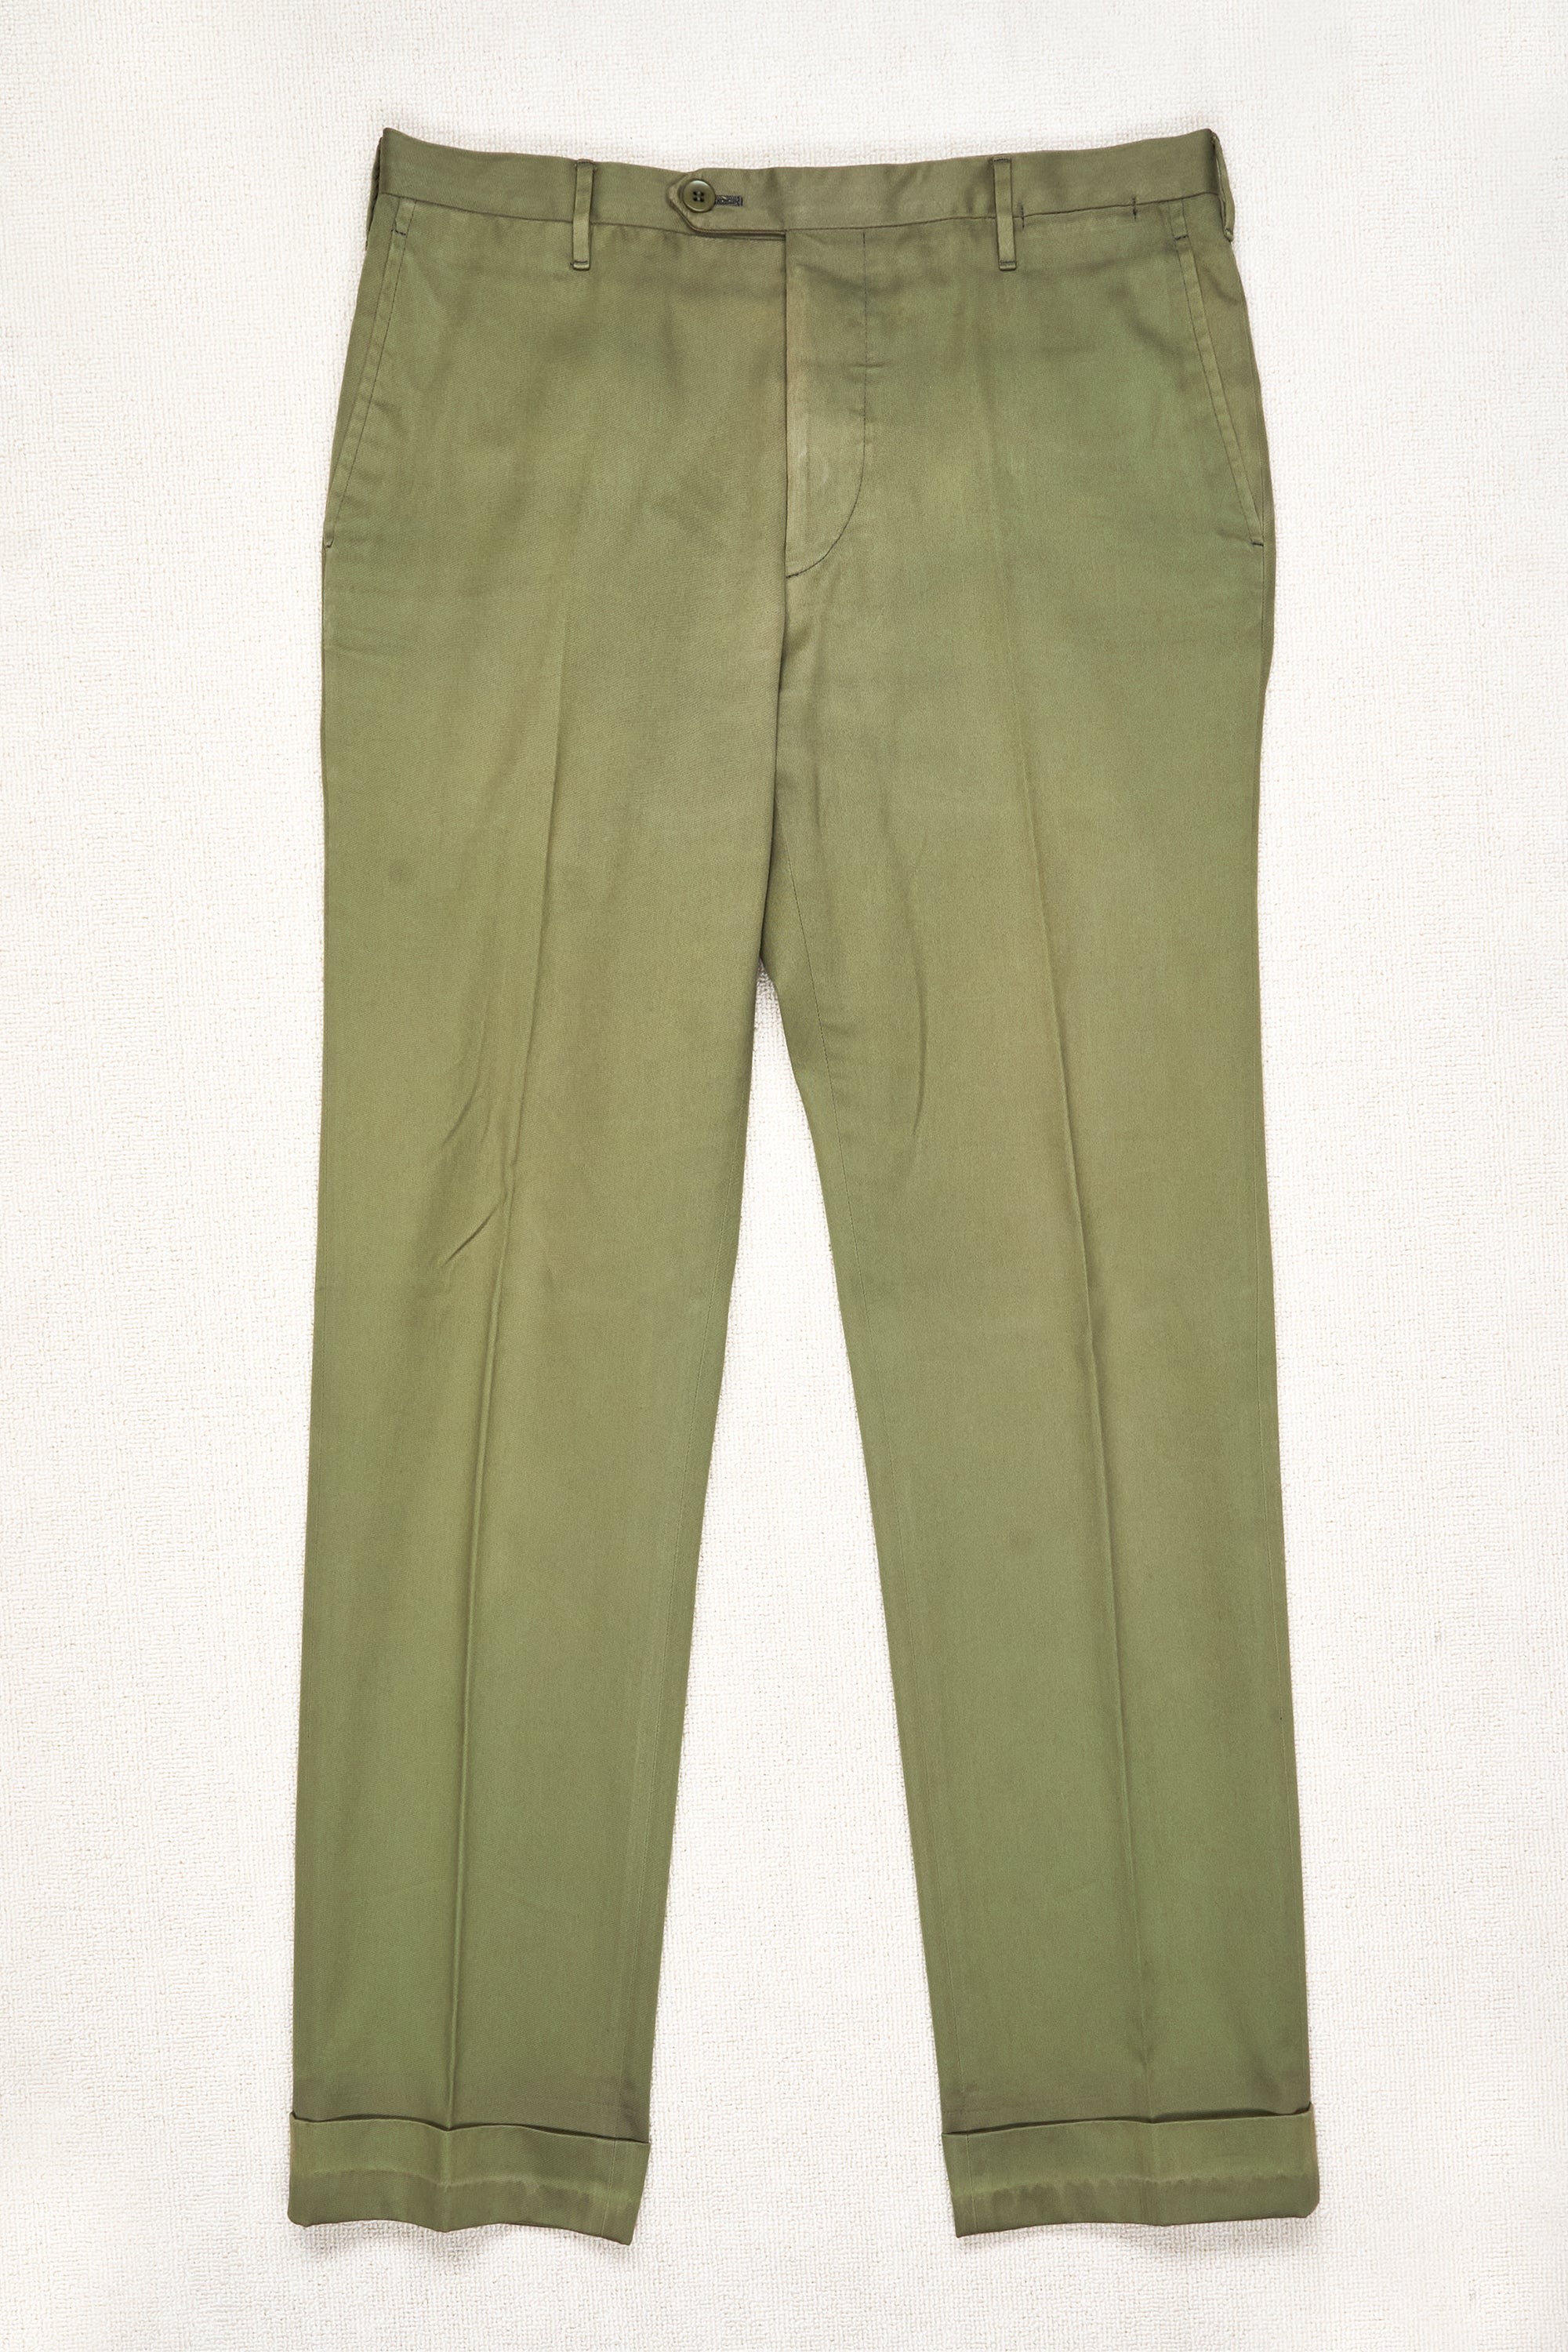 Rota Olive Cotton Flat Front Trousers